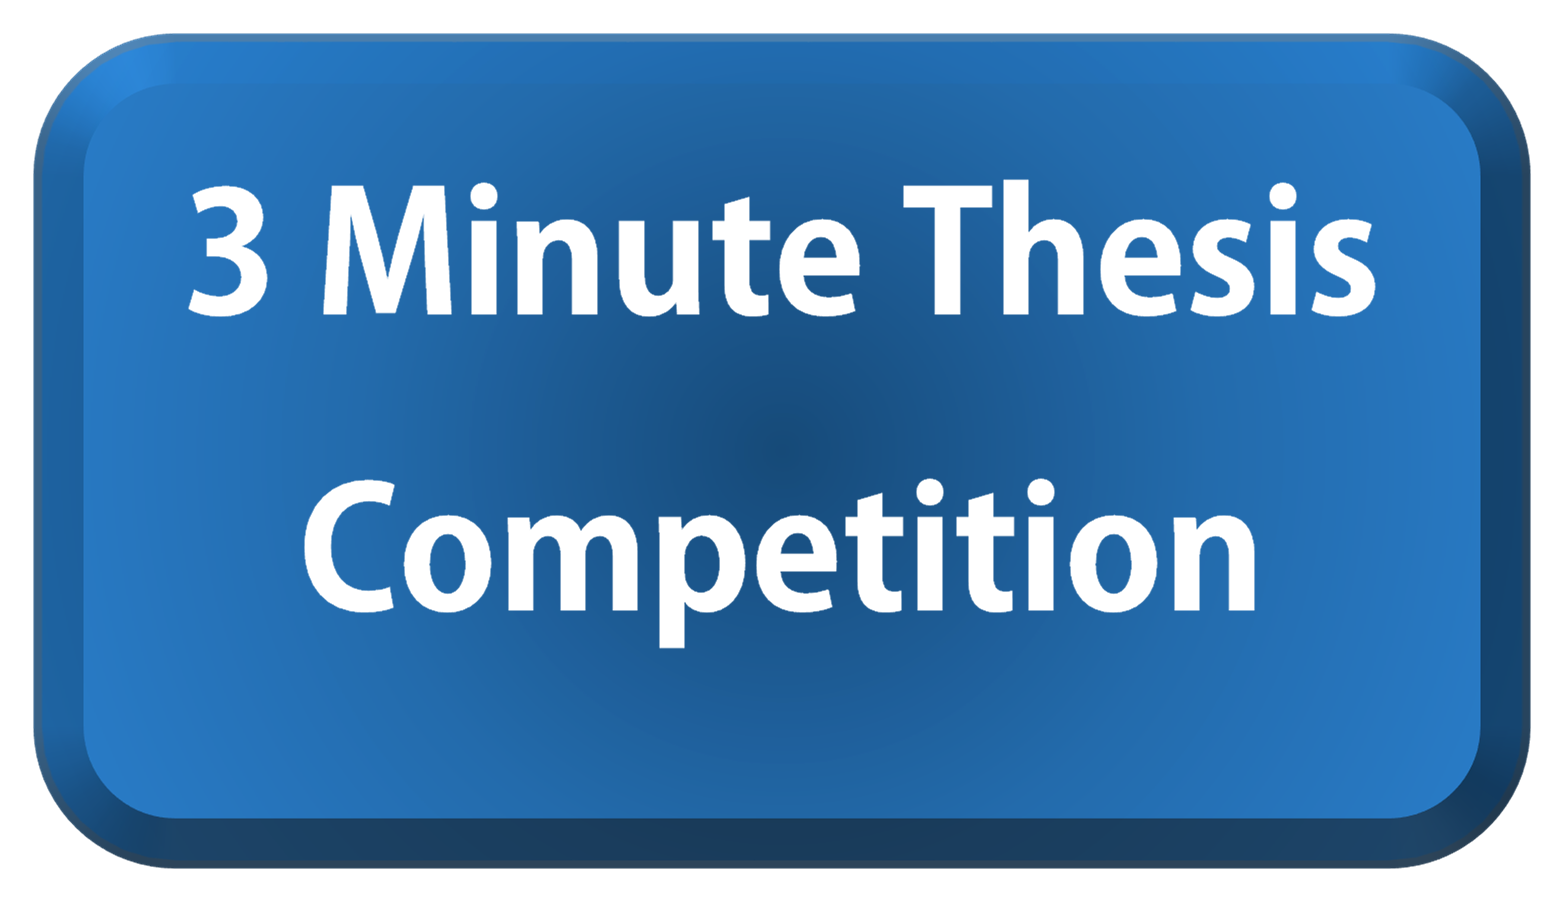 3MT Logo: A logo for the 3 Minute Thesis competition.